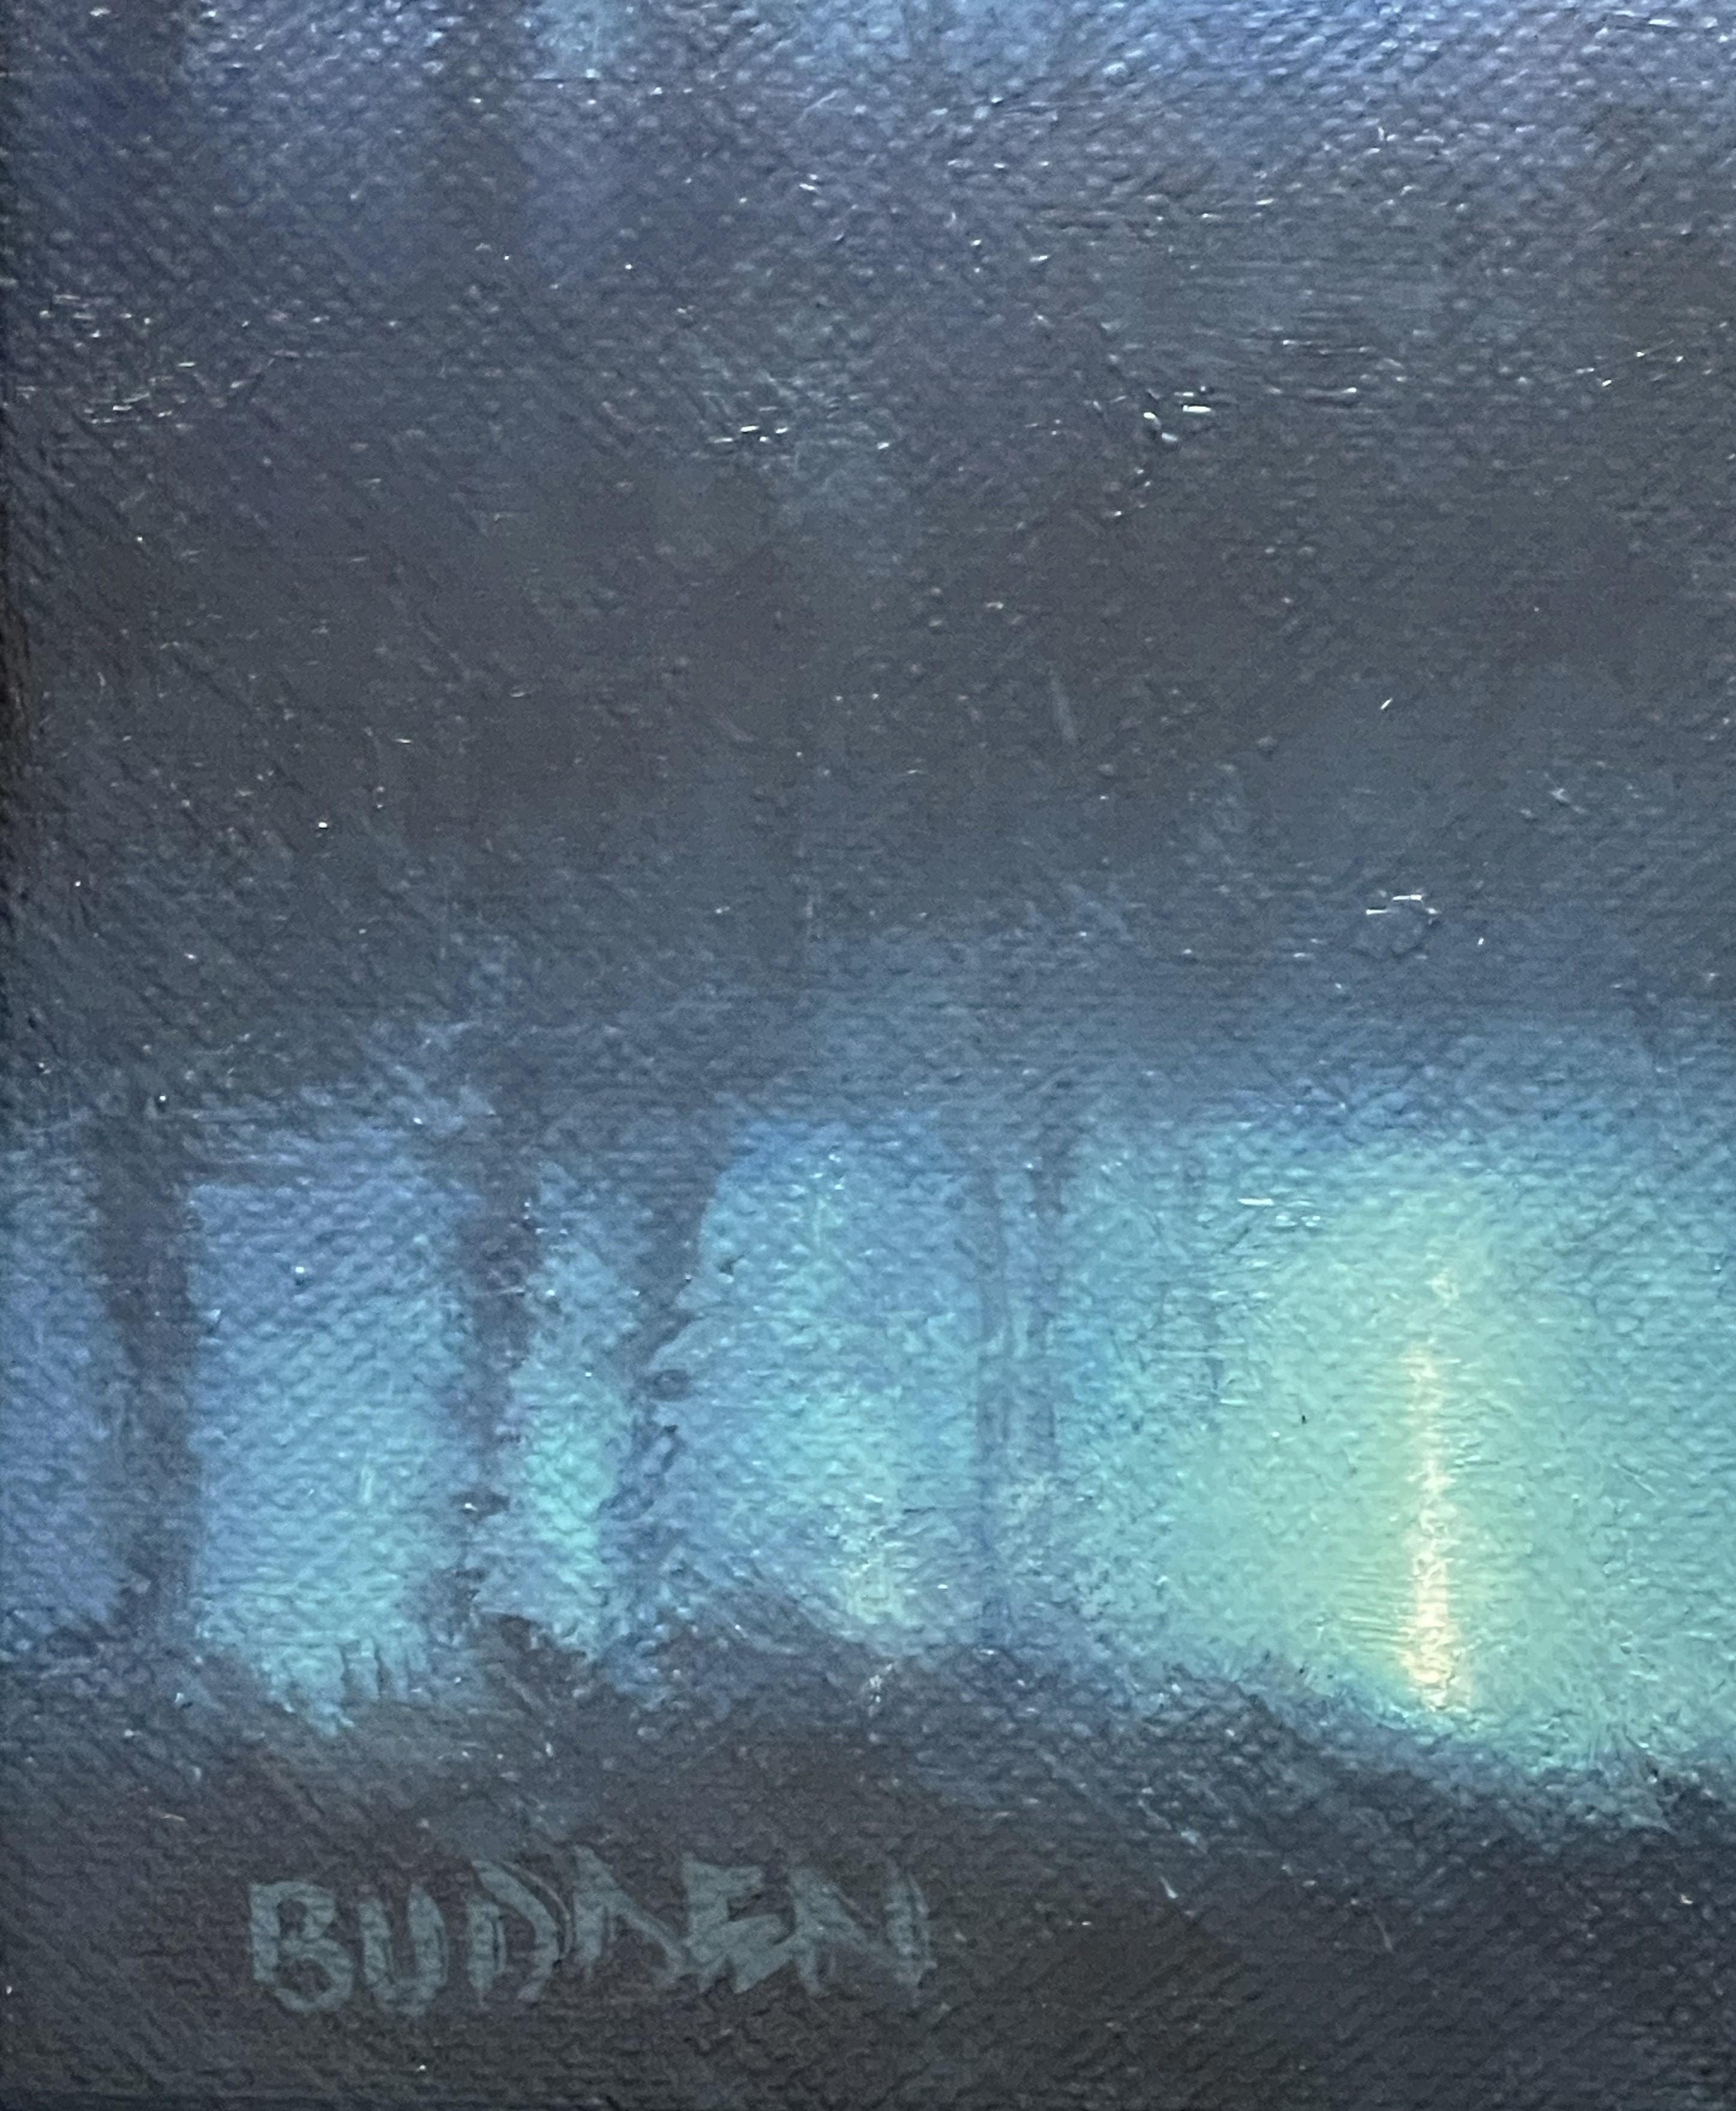  Impressionistic Moonlight Landscape Oil Painting Michael Budden  For Sale 4